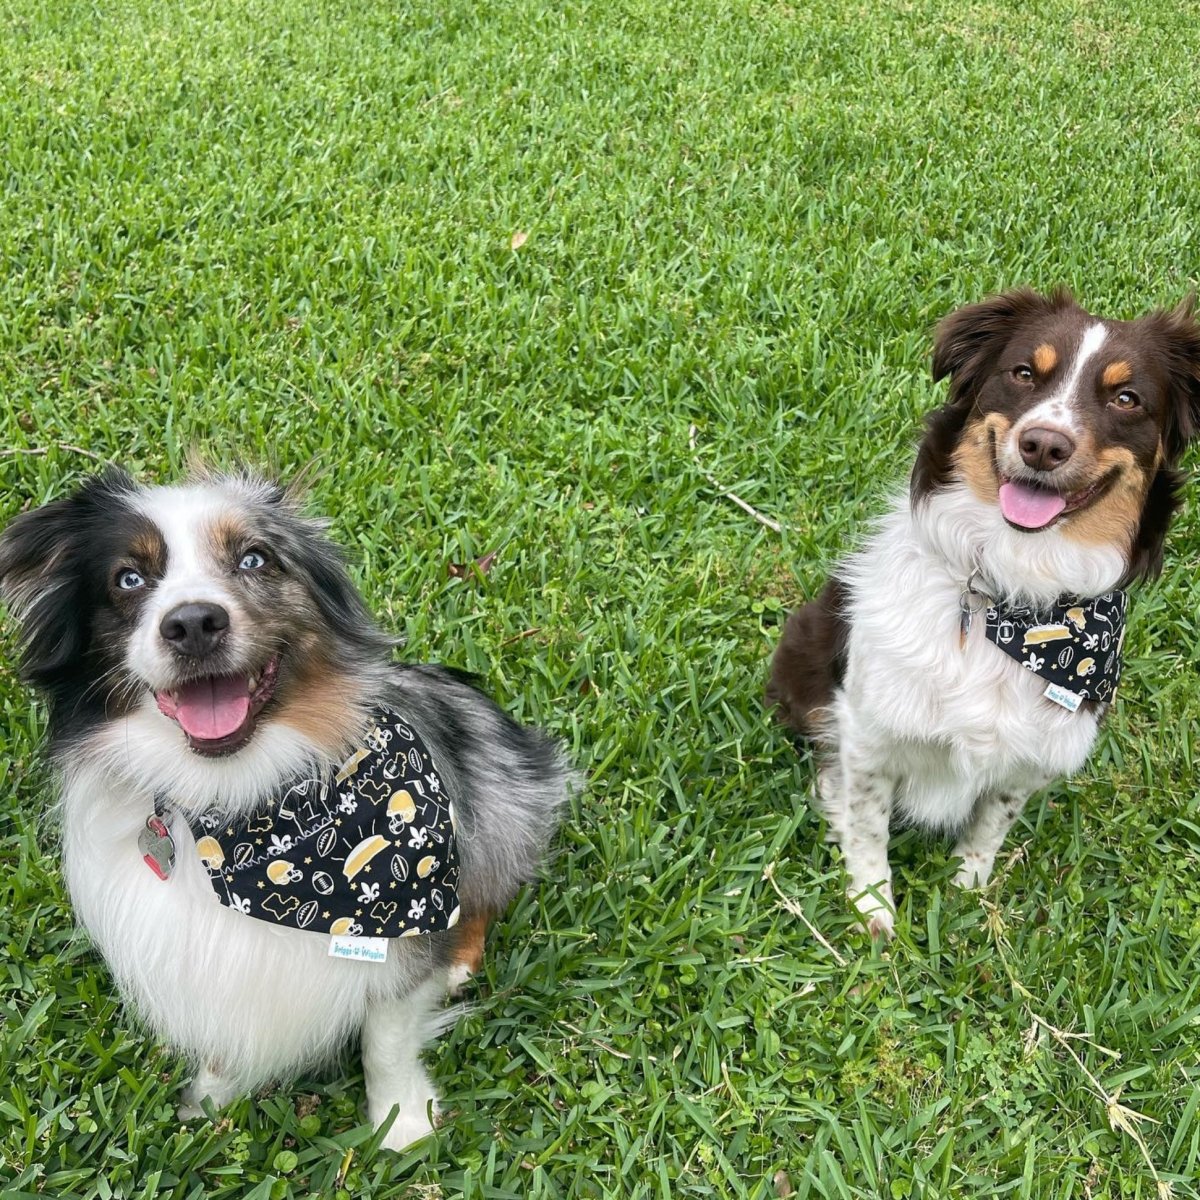 WHO DAT Nation Over the Collar Dog Bandana | Briggs 'n' Wiggles - Briggs 'n' Wiggles